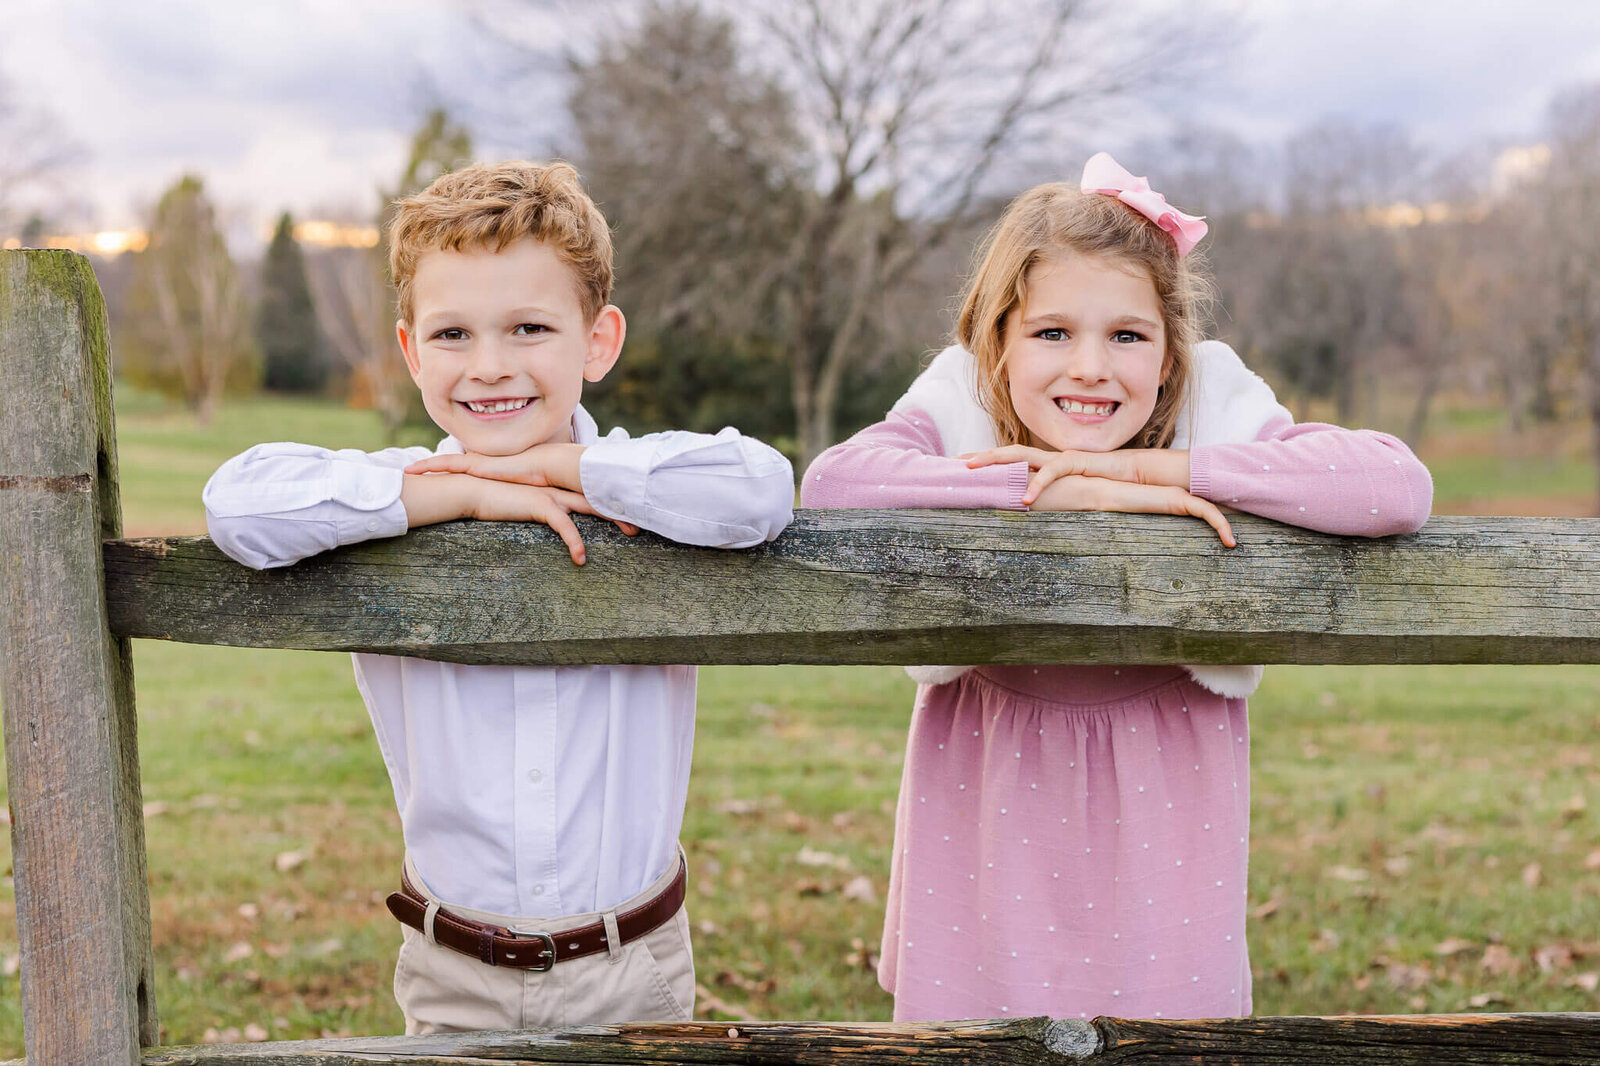 A brother and sister leaning against a fence and smiling.